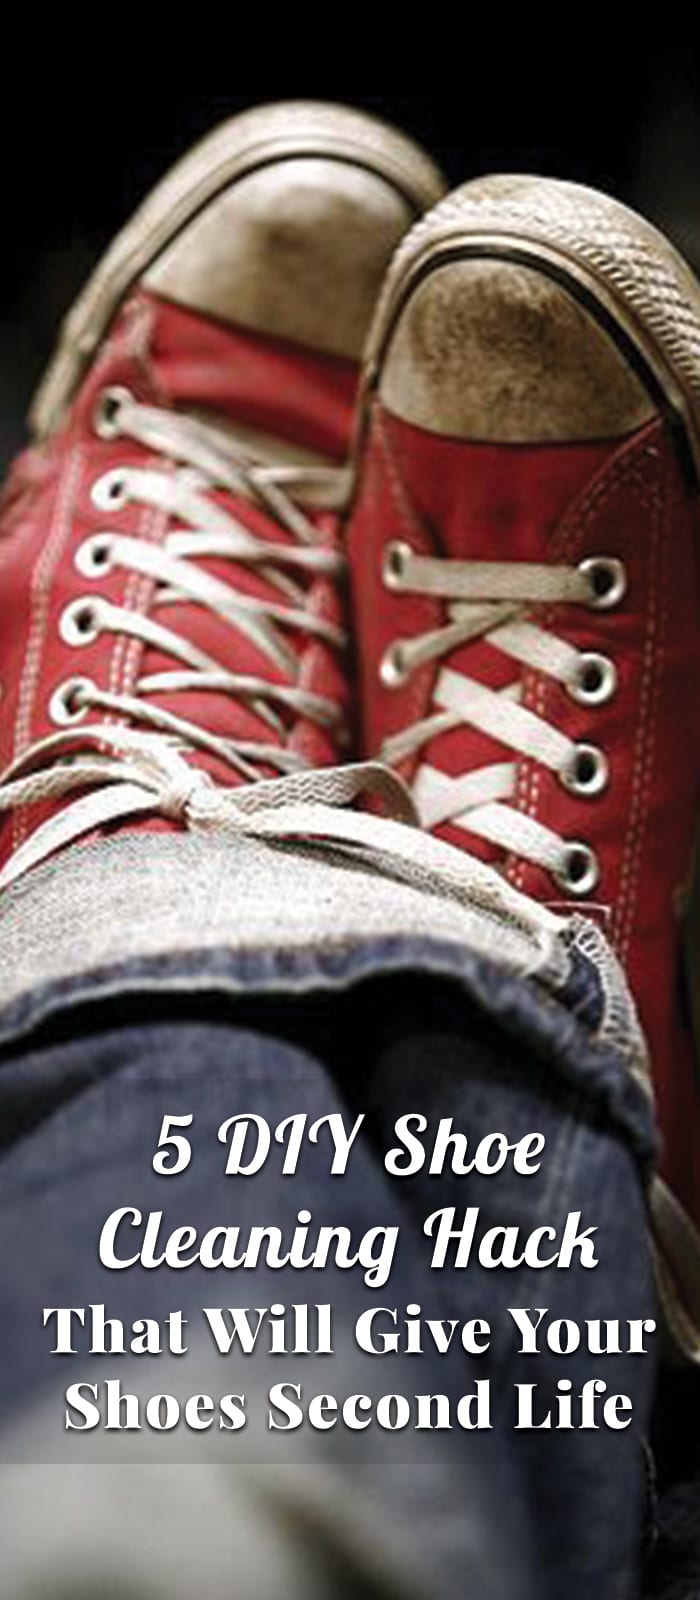 5 DIY Shoe Cleaning Hack That Will Give Your Shoes Second Life